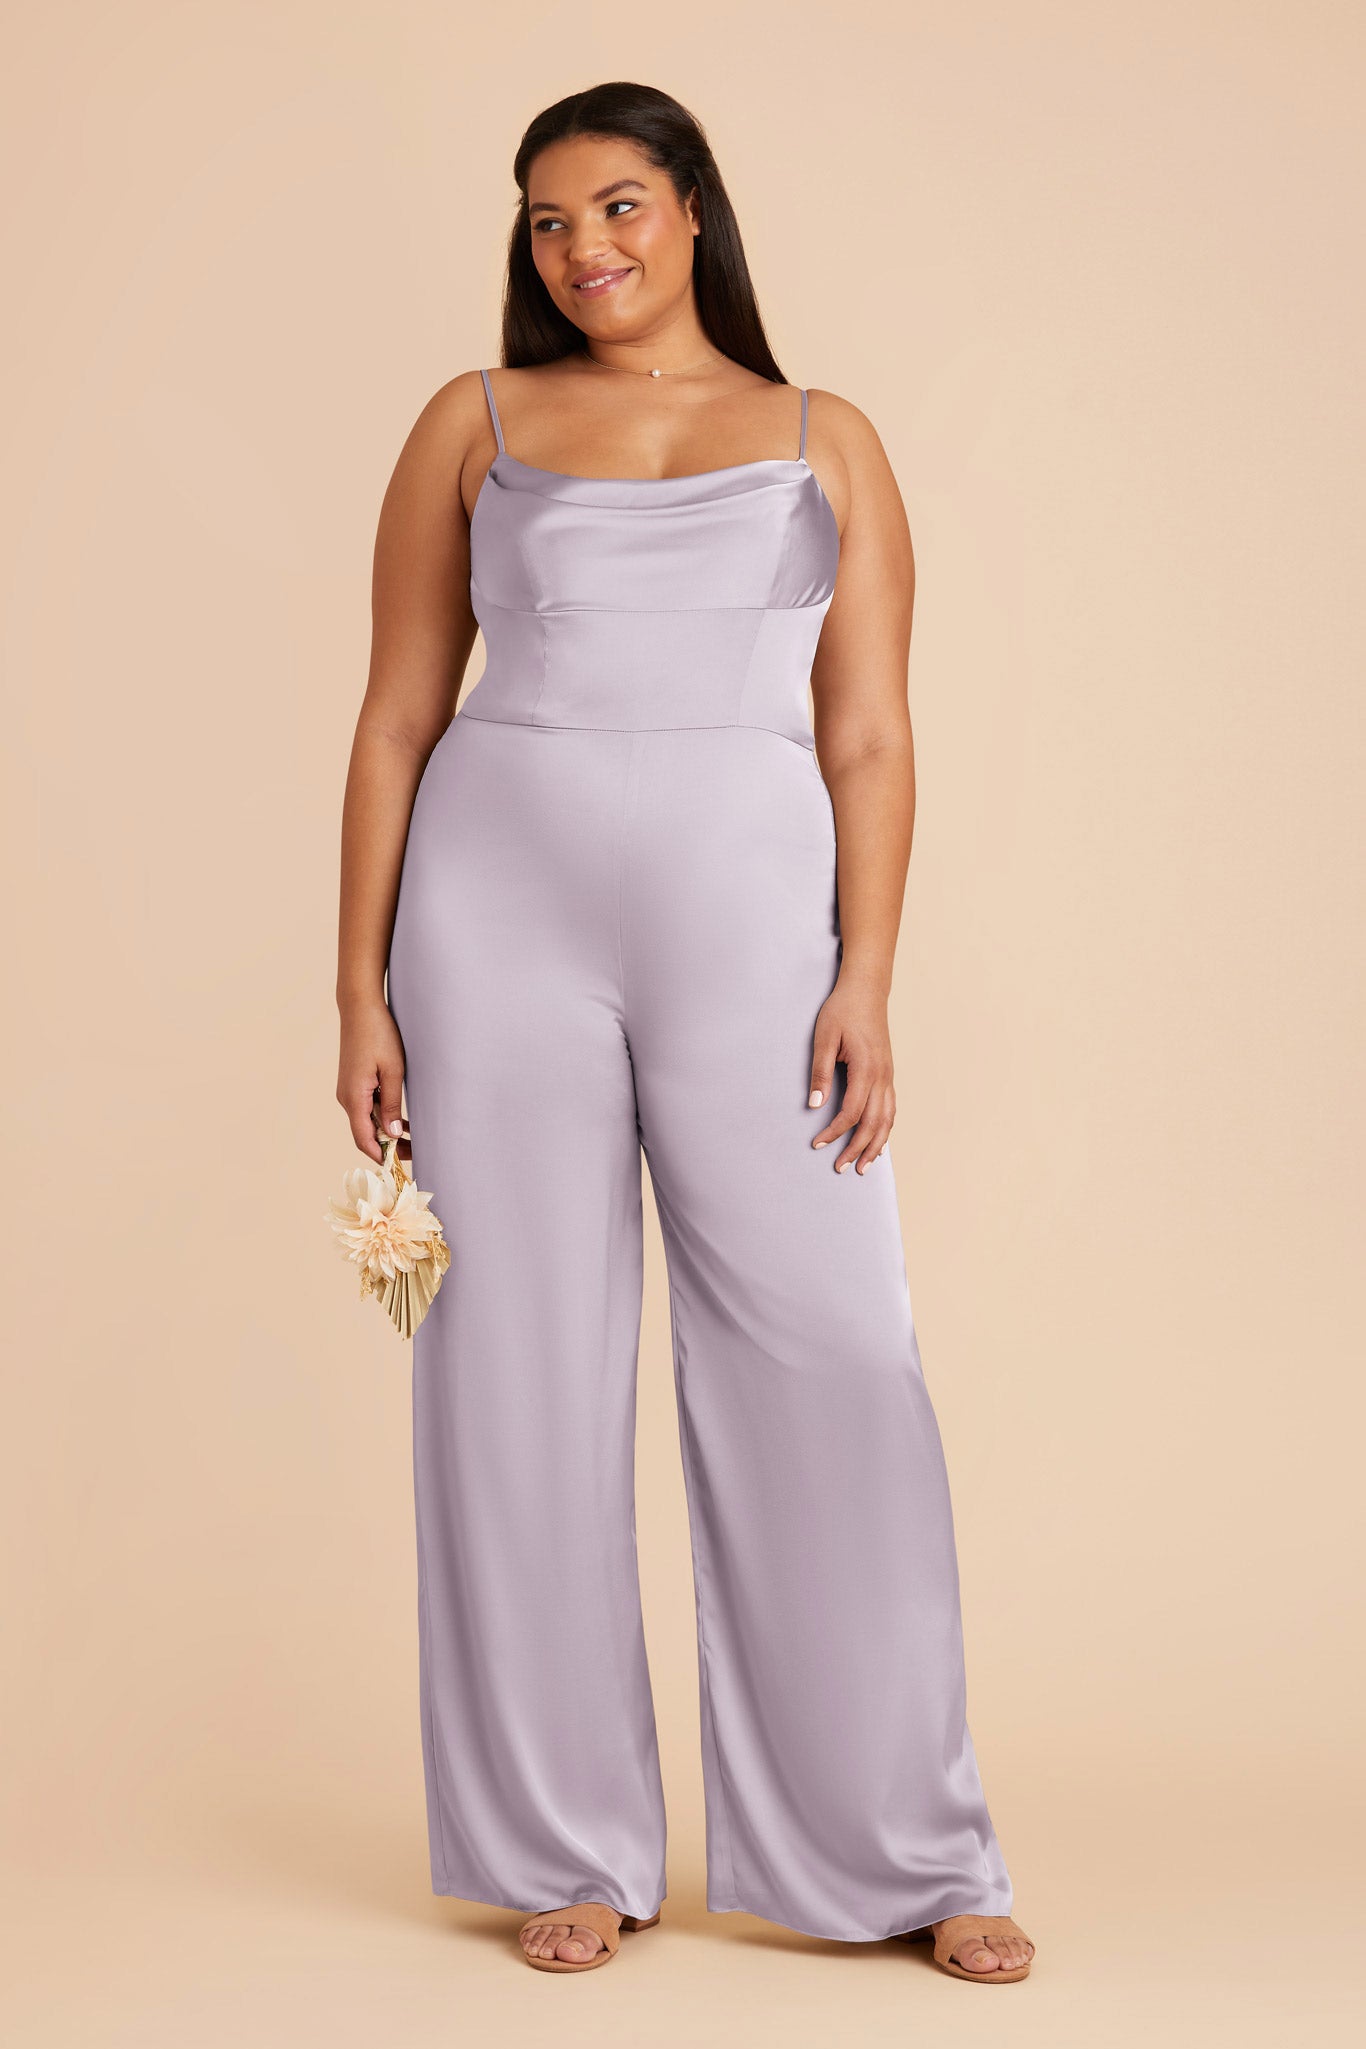 Dusty Lilac Donna Matte Satin Bridesmaid Jumpsuit by Birdy Grey